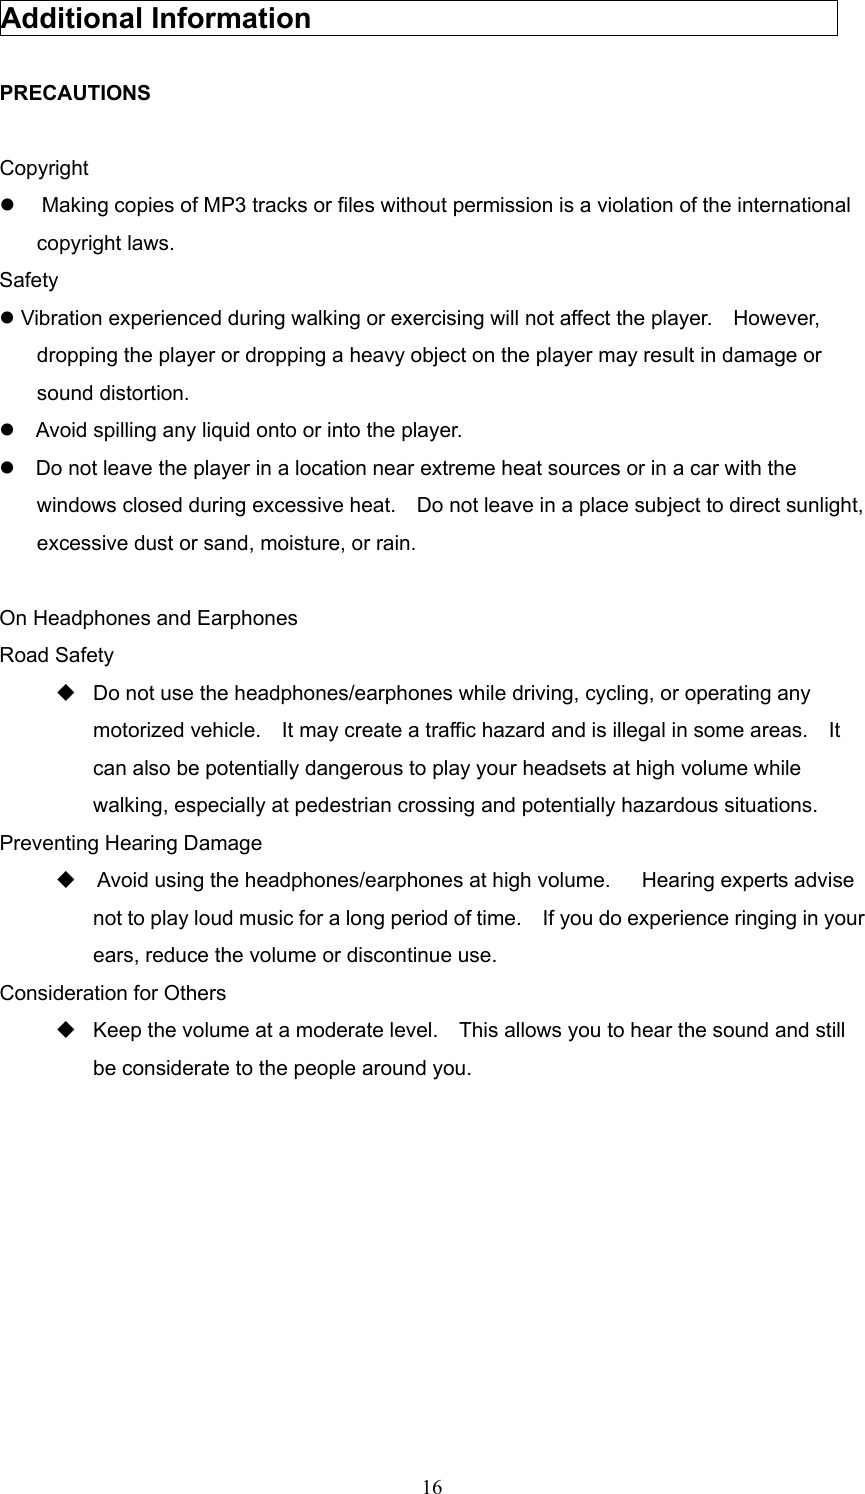  16Additional Information                                      PRECAUTIONS  Copyright   Making copies of MP3 tracks or files without permission is a violation of the international copyright laws. Safety  Vibration experienced during walking or exercising will not affect the player.  However, dropping the player or dropping a heavy object on the player may result in damage or sound distortion.     Avoid spilling any liquid onto or into the player.     Do not leave the player in a location near extreme heat sources or in a car with the windows closed during excessive heat.    Do not leave in a place subject to direct sunlight, excessive dust or sand, moisture, or rain.      On Headphones and Earphones Road Safety  Do not use the headphones/earphones while driving, cycling, or operating any motorized vehicle.    It may create a traffic hazard and is illegal in some areas.    It can also be potentially dangerous to play your headsets at high volume while walking, especially at pedestrian crossing and potentially hazardous situations.     Preventing Hearing Damage     Avoid using the headphones/earphones at high volume.      Hearing experts advise not to play loud music for a long period of time.    If you do experience ringing in your ears, reduce the volume or discontinue use. Consideration for Others  Keep the volume at a moderate level.    This allows you to hear the sound and still be considerate to the people around you.          